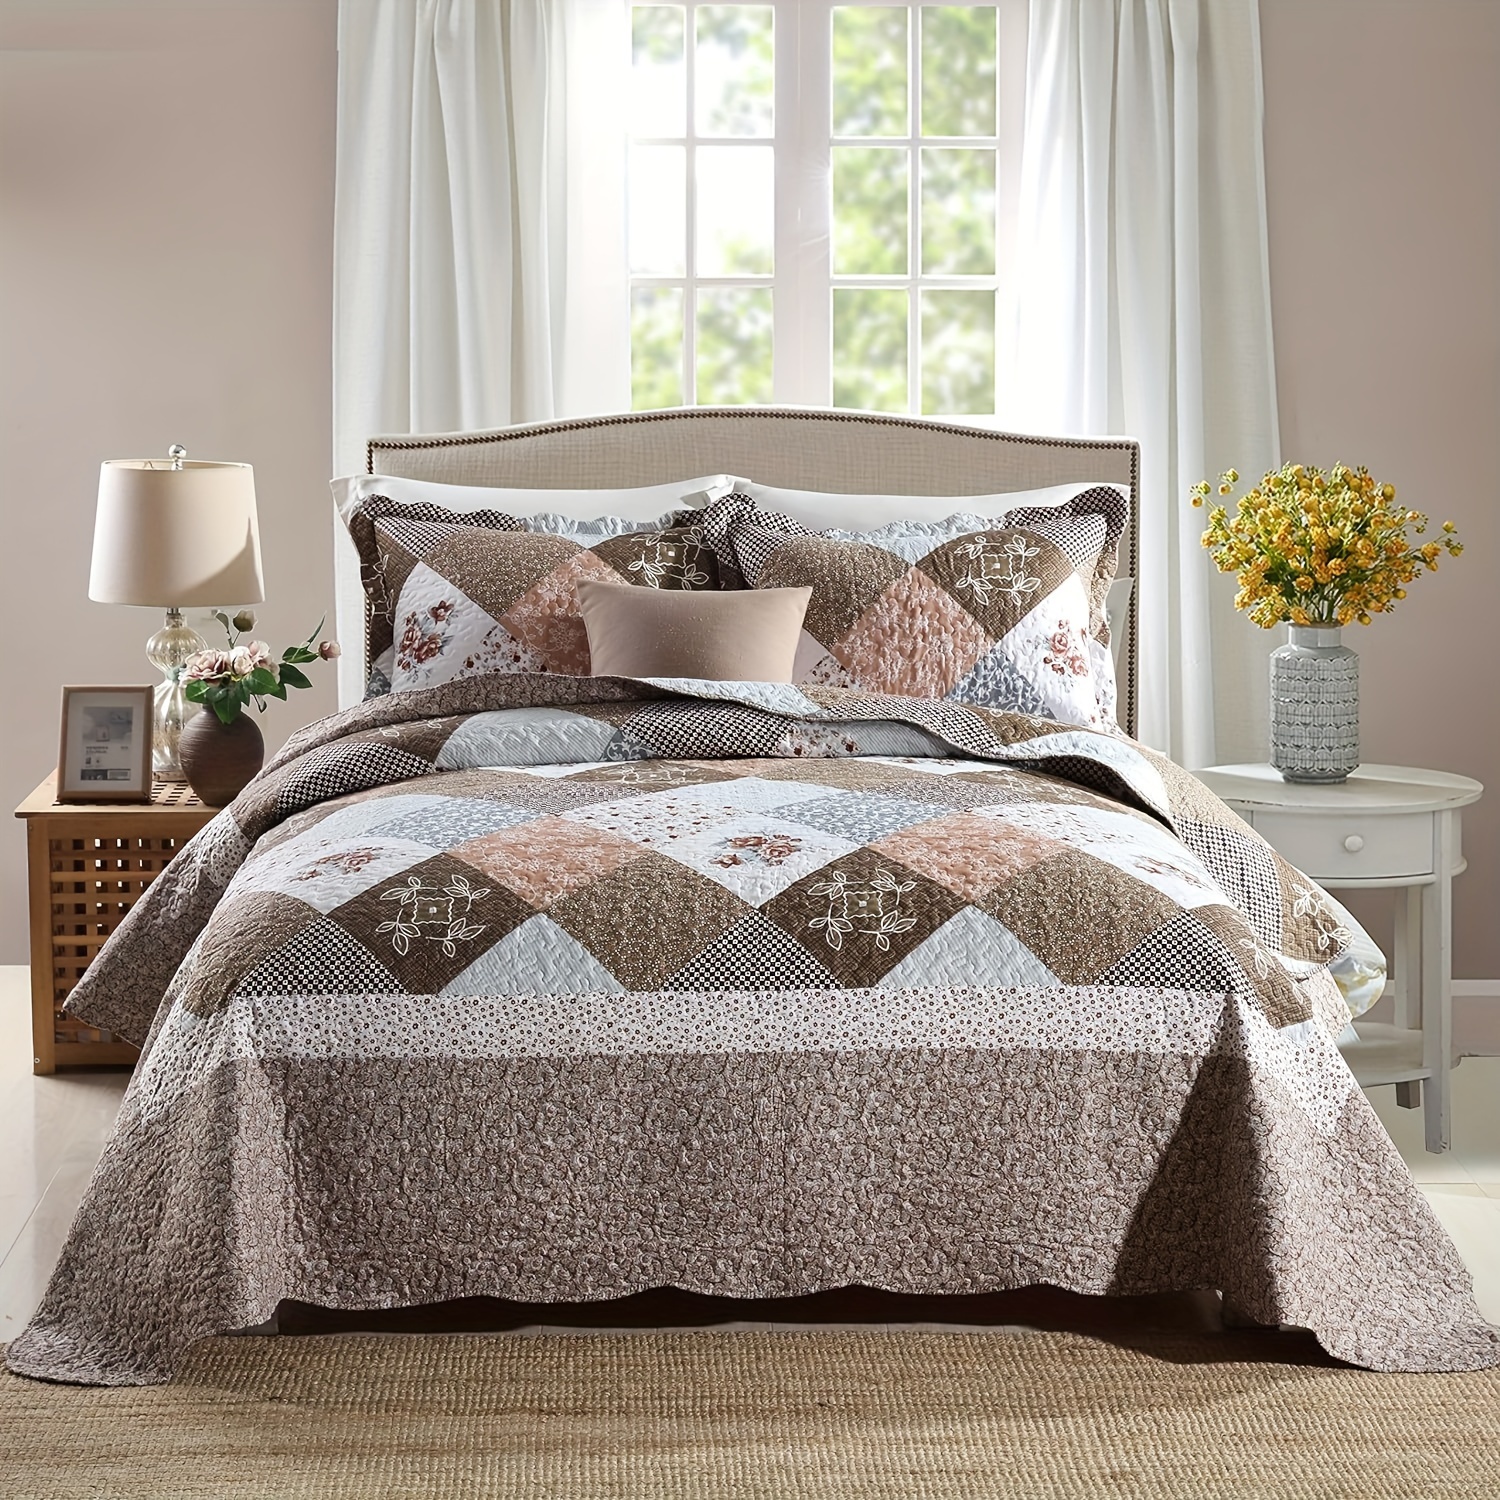 

3pcs Quilt Sets With Brown Shams Oversize Bedding Bedspread Reversible Soft Coverlet Set Comfort Sets For All Season, Queen Size